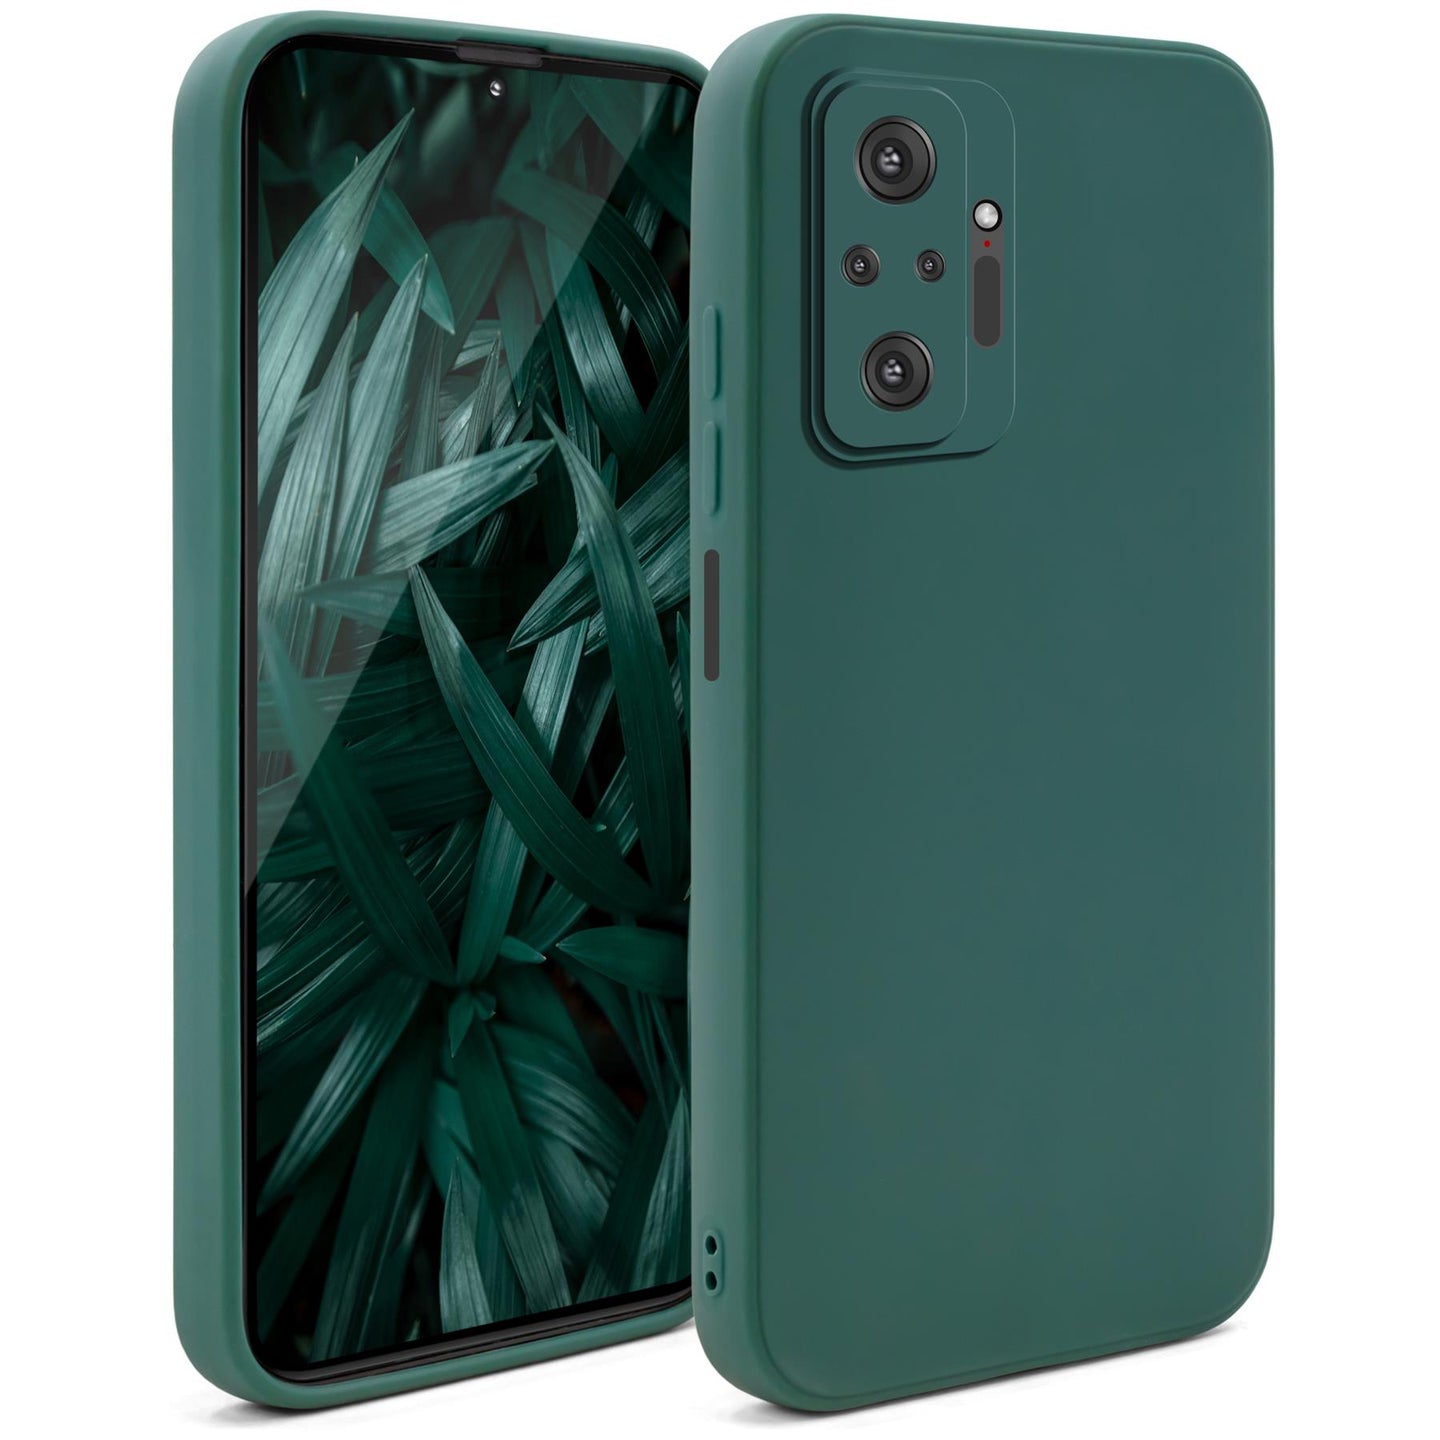 Moozy Minimalist Series Silicone Case for Xiaomi Redmi Note 10 Pro and Note 10 Pro Max, Dark Green - Matte Finish Lightweight Mobile Phone Case Slim Soft Protective TPU Cover with Matte Surface